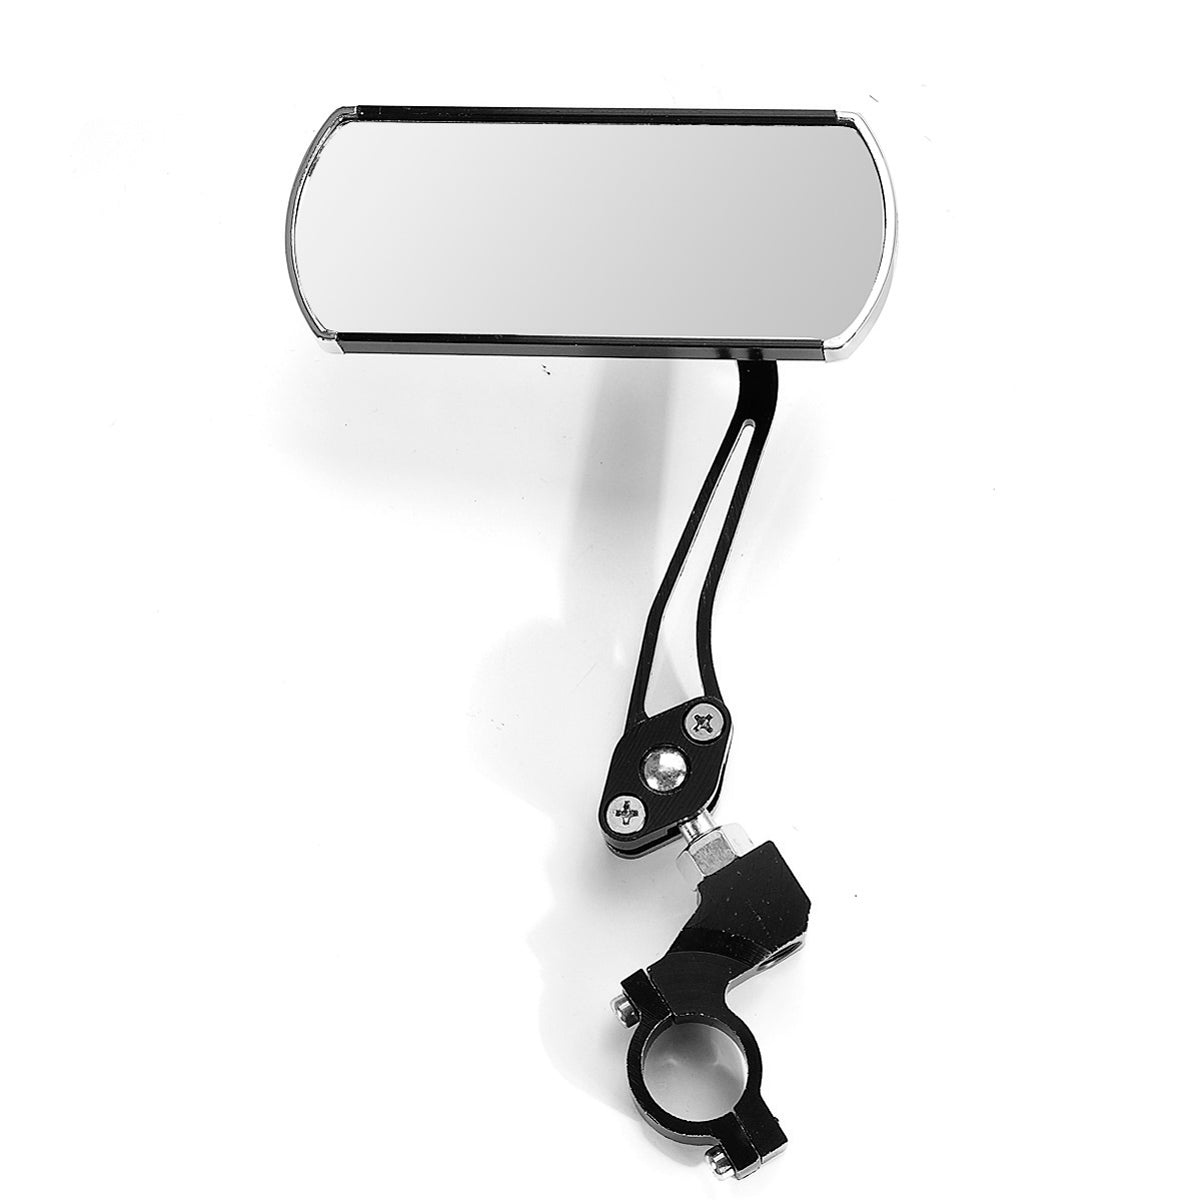 Lavender Pair 360° Rotate Rearview Mirrors Adjustable Aluminum Alloy Cycling Bike Mirror Motorcycle